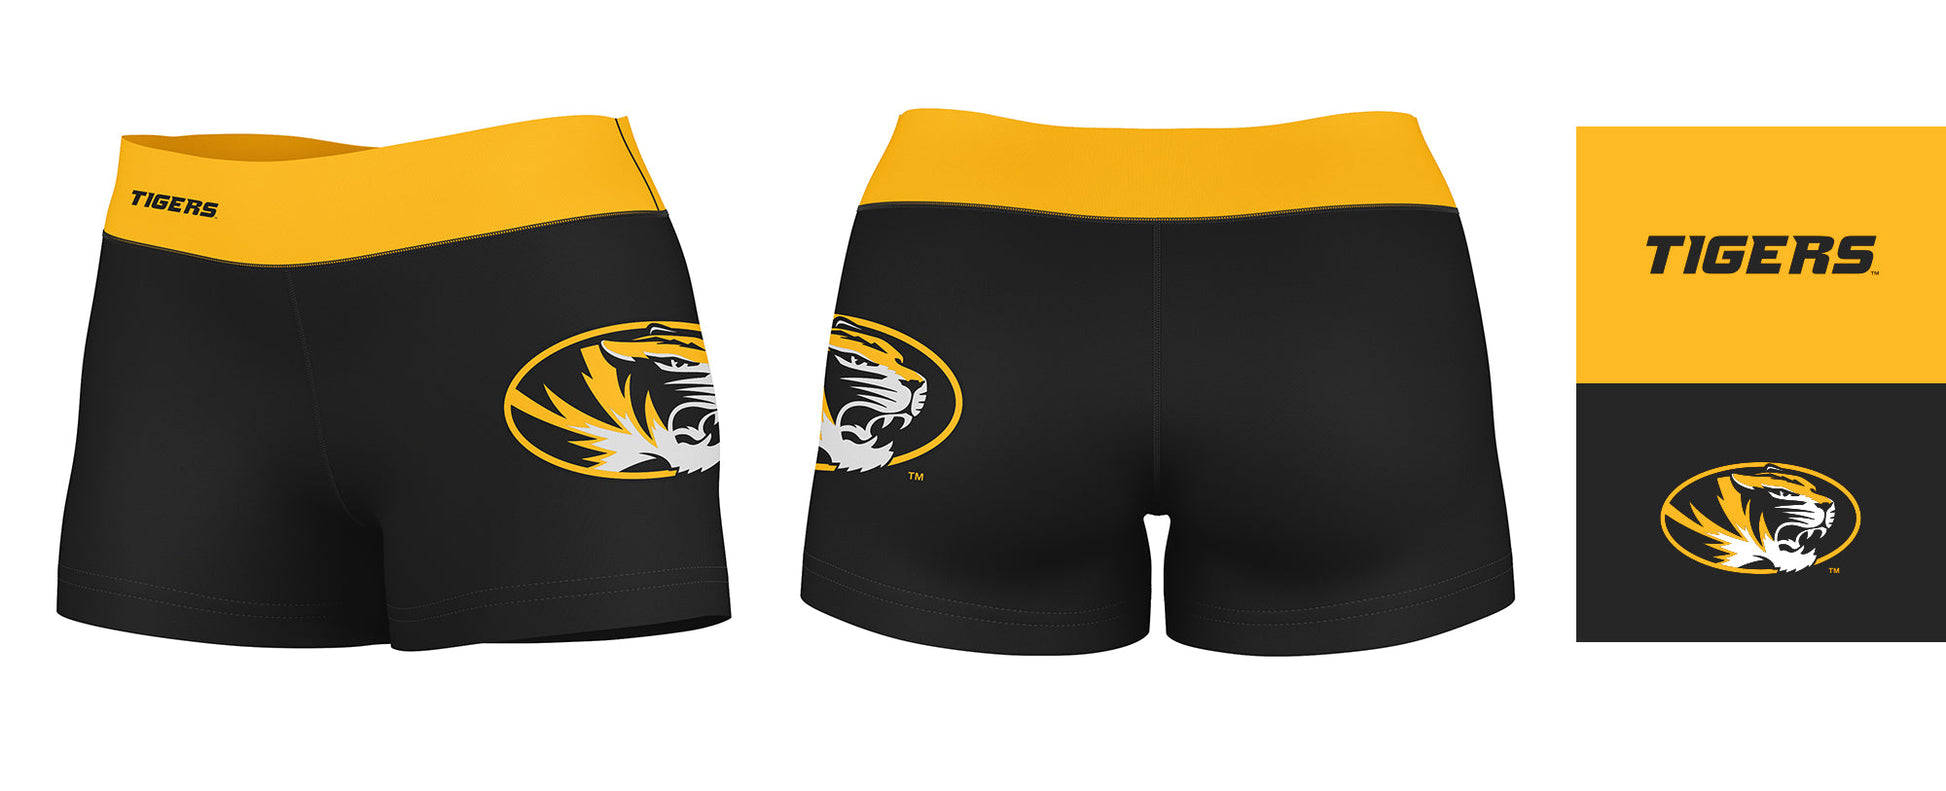 Mizzou Tigers Game Day Logo on Thigh and Waistband Black & Gold Womens